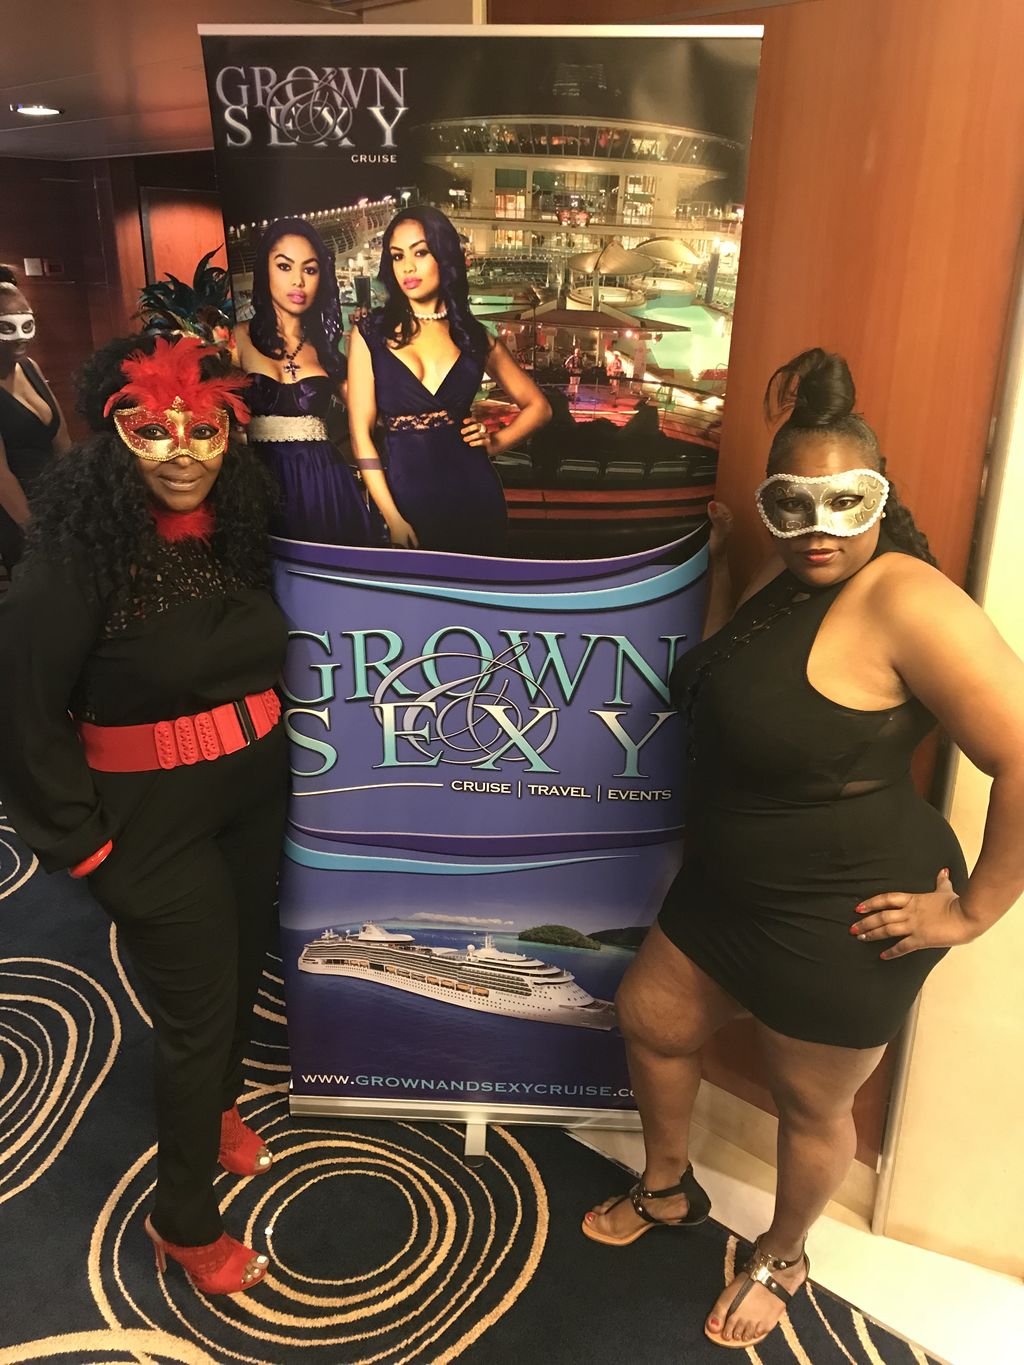 Uploaded by Marsheena Harris from 15th Annual Grown & Sexy Super Bowl Cruise on Thursday, January 26, 2023